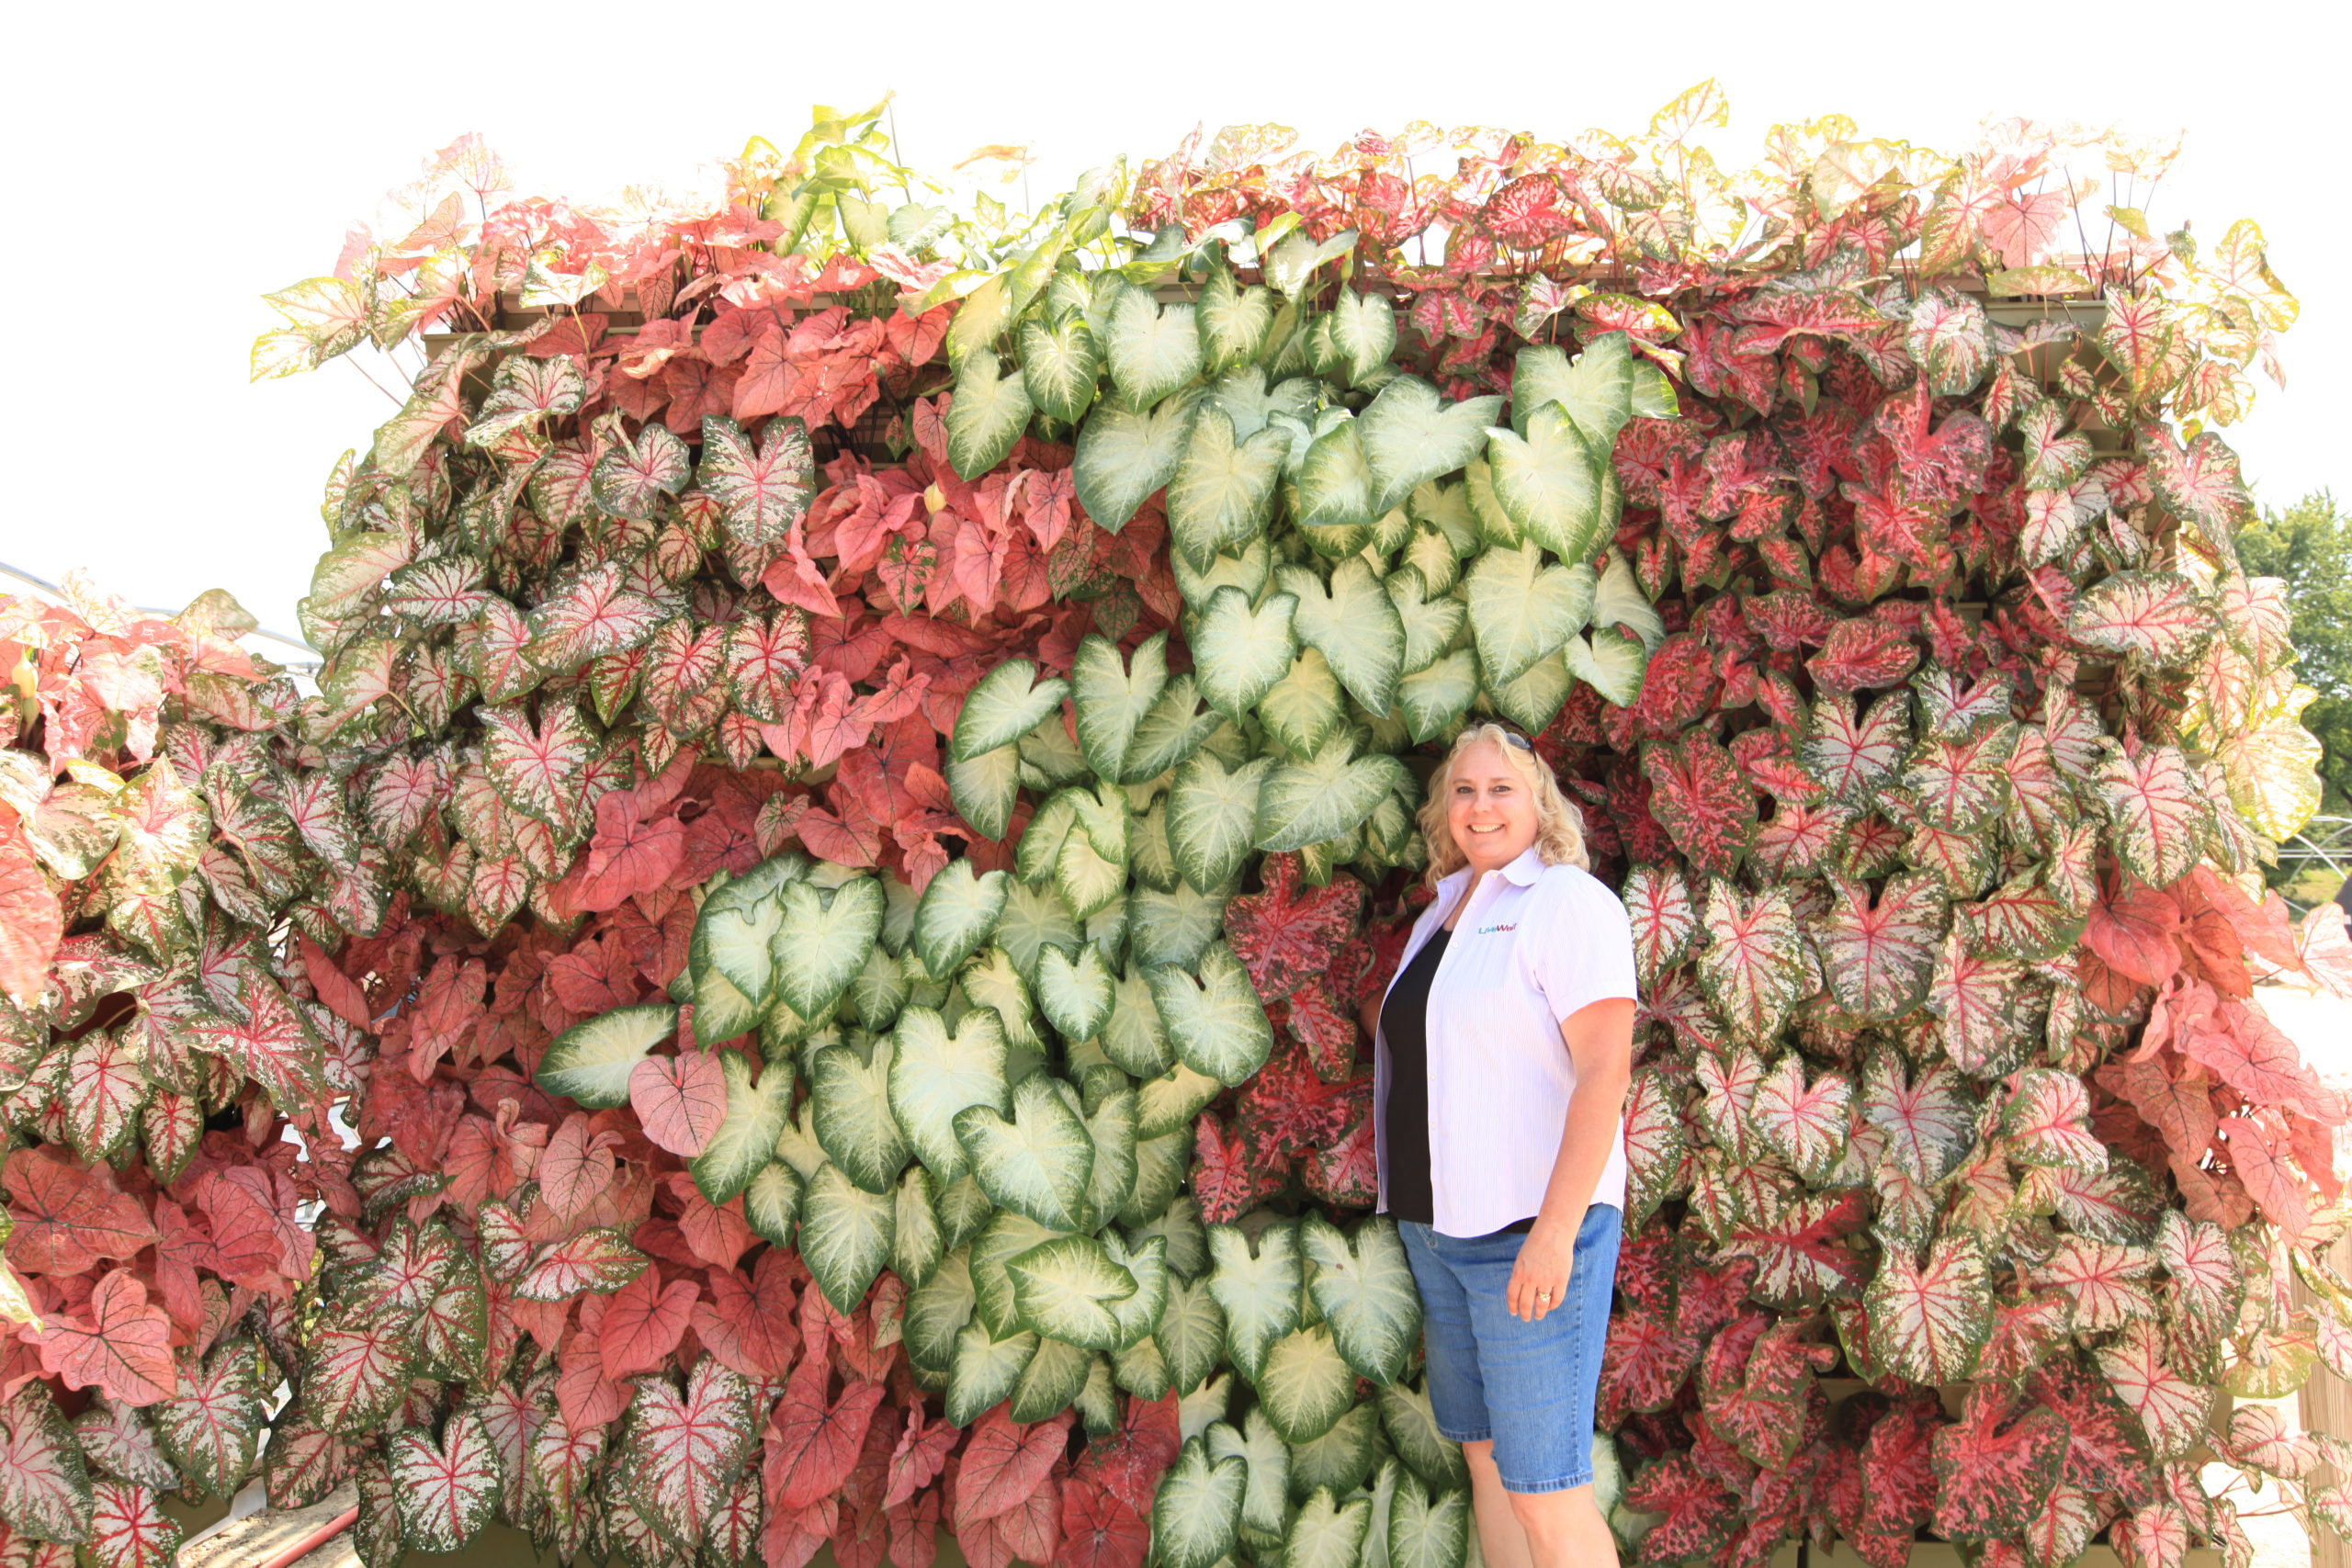 Lori May posing in front of a beautiful LiveWall with caladiums